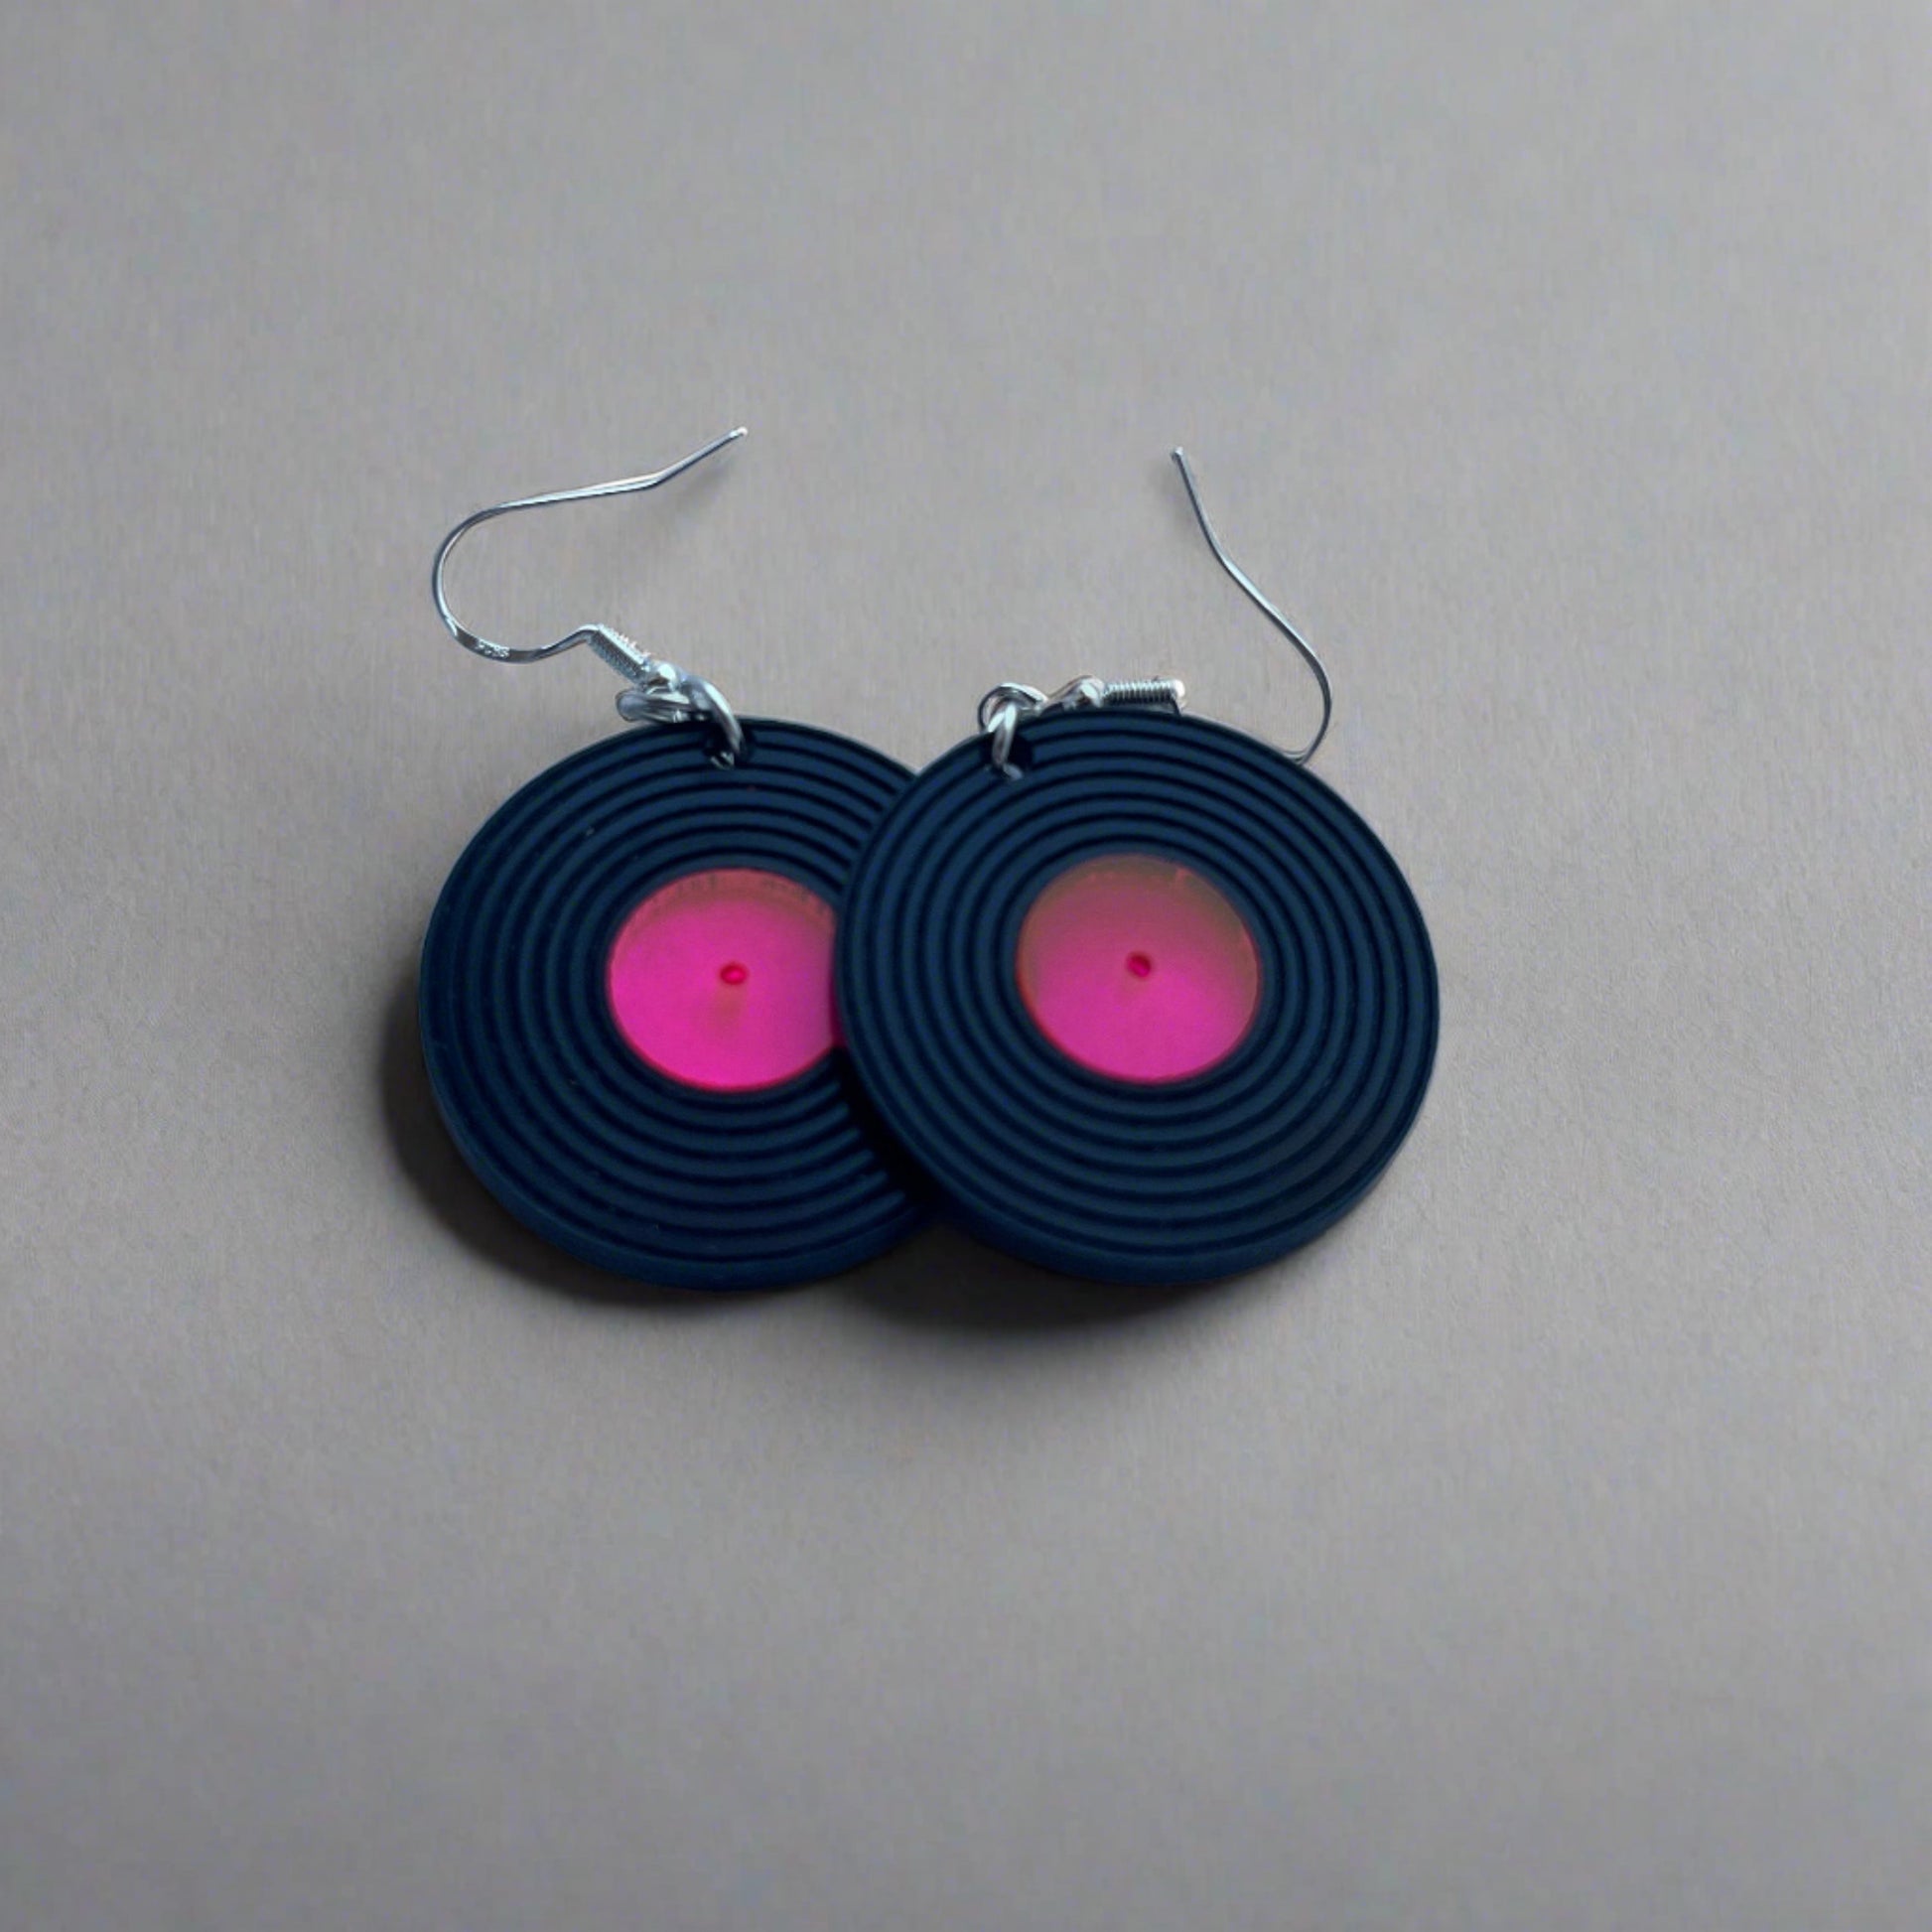 vinyl record earrings with pink center